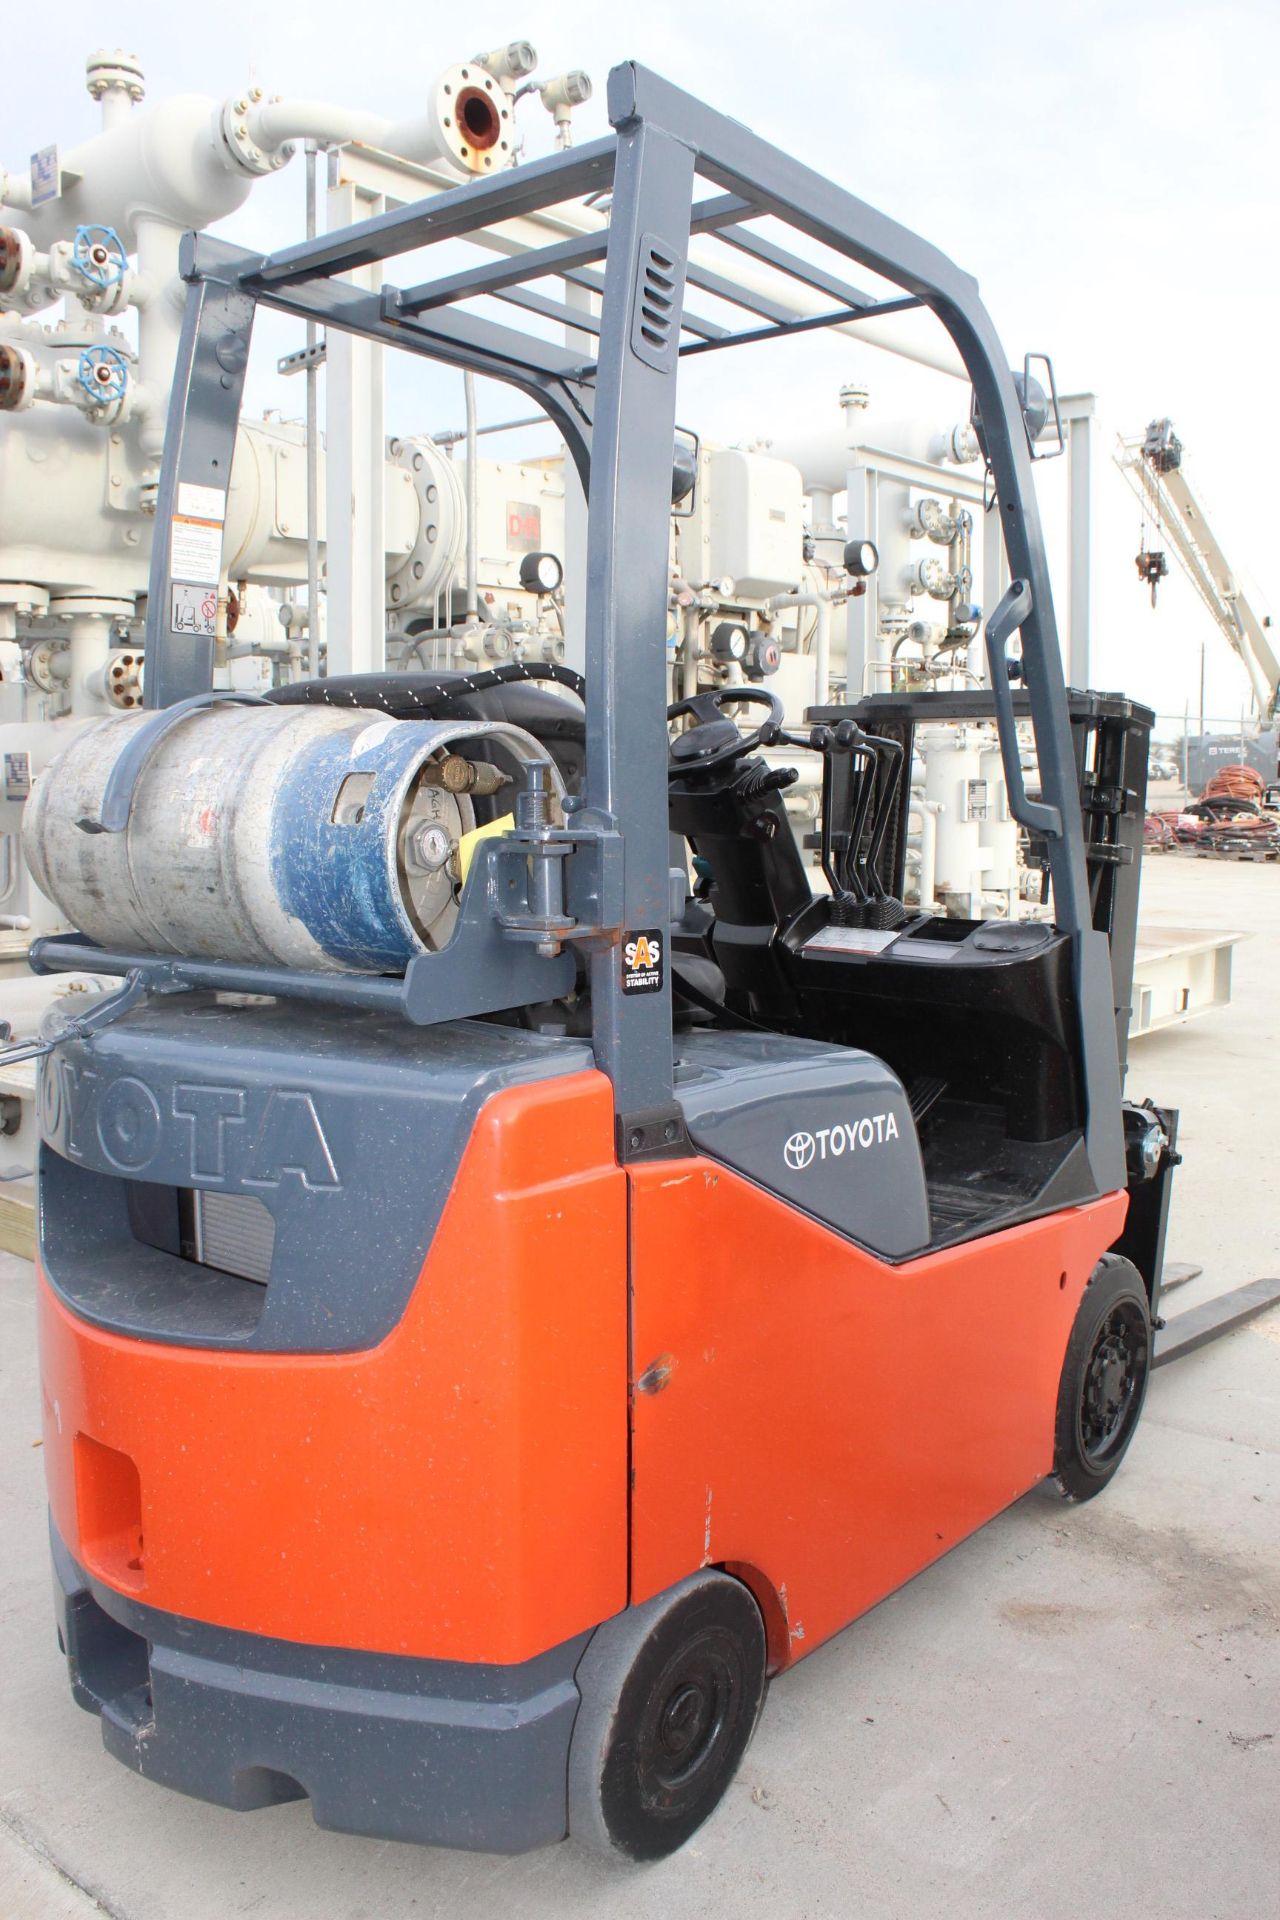 FORKLIFT, TOYOTA 3,000 LB. CAP. MDL. 8FGCU15, new 2013, LPG pwrd., 80" lift ht., 2-stage space saver - Image 3 of 4